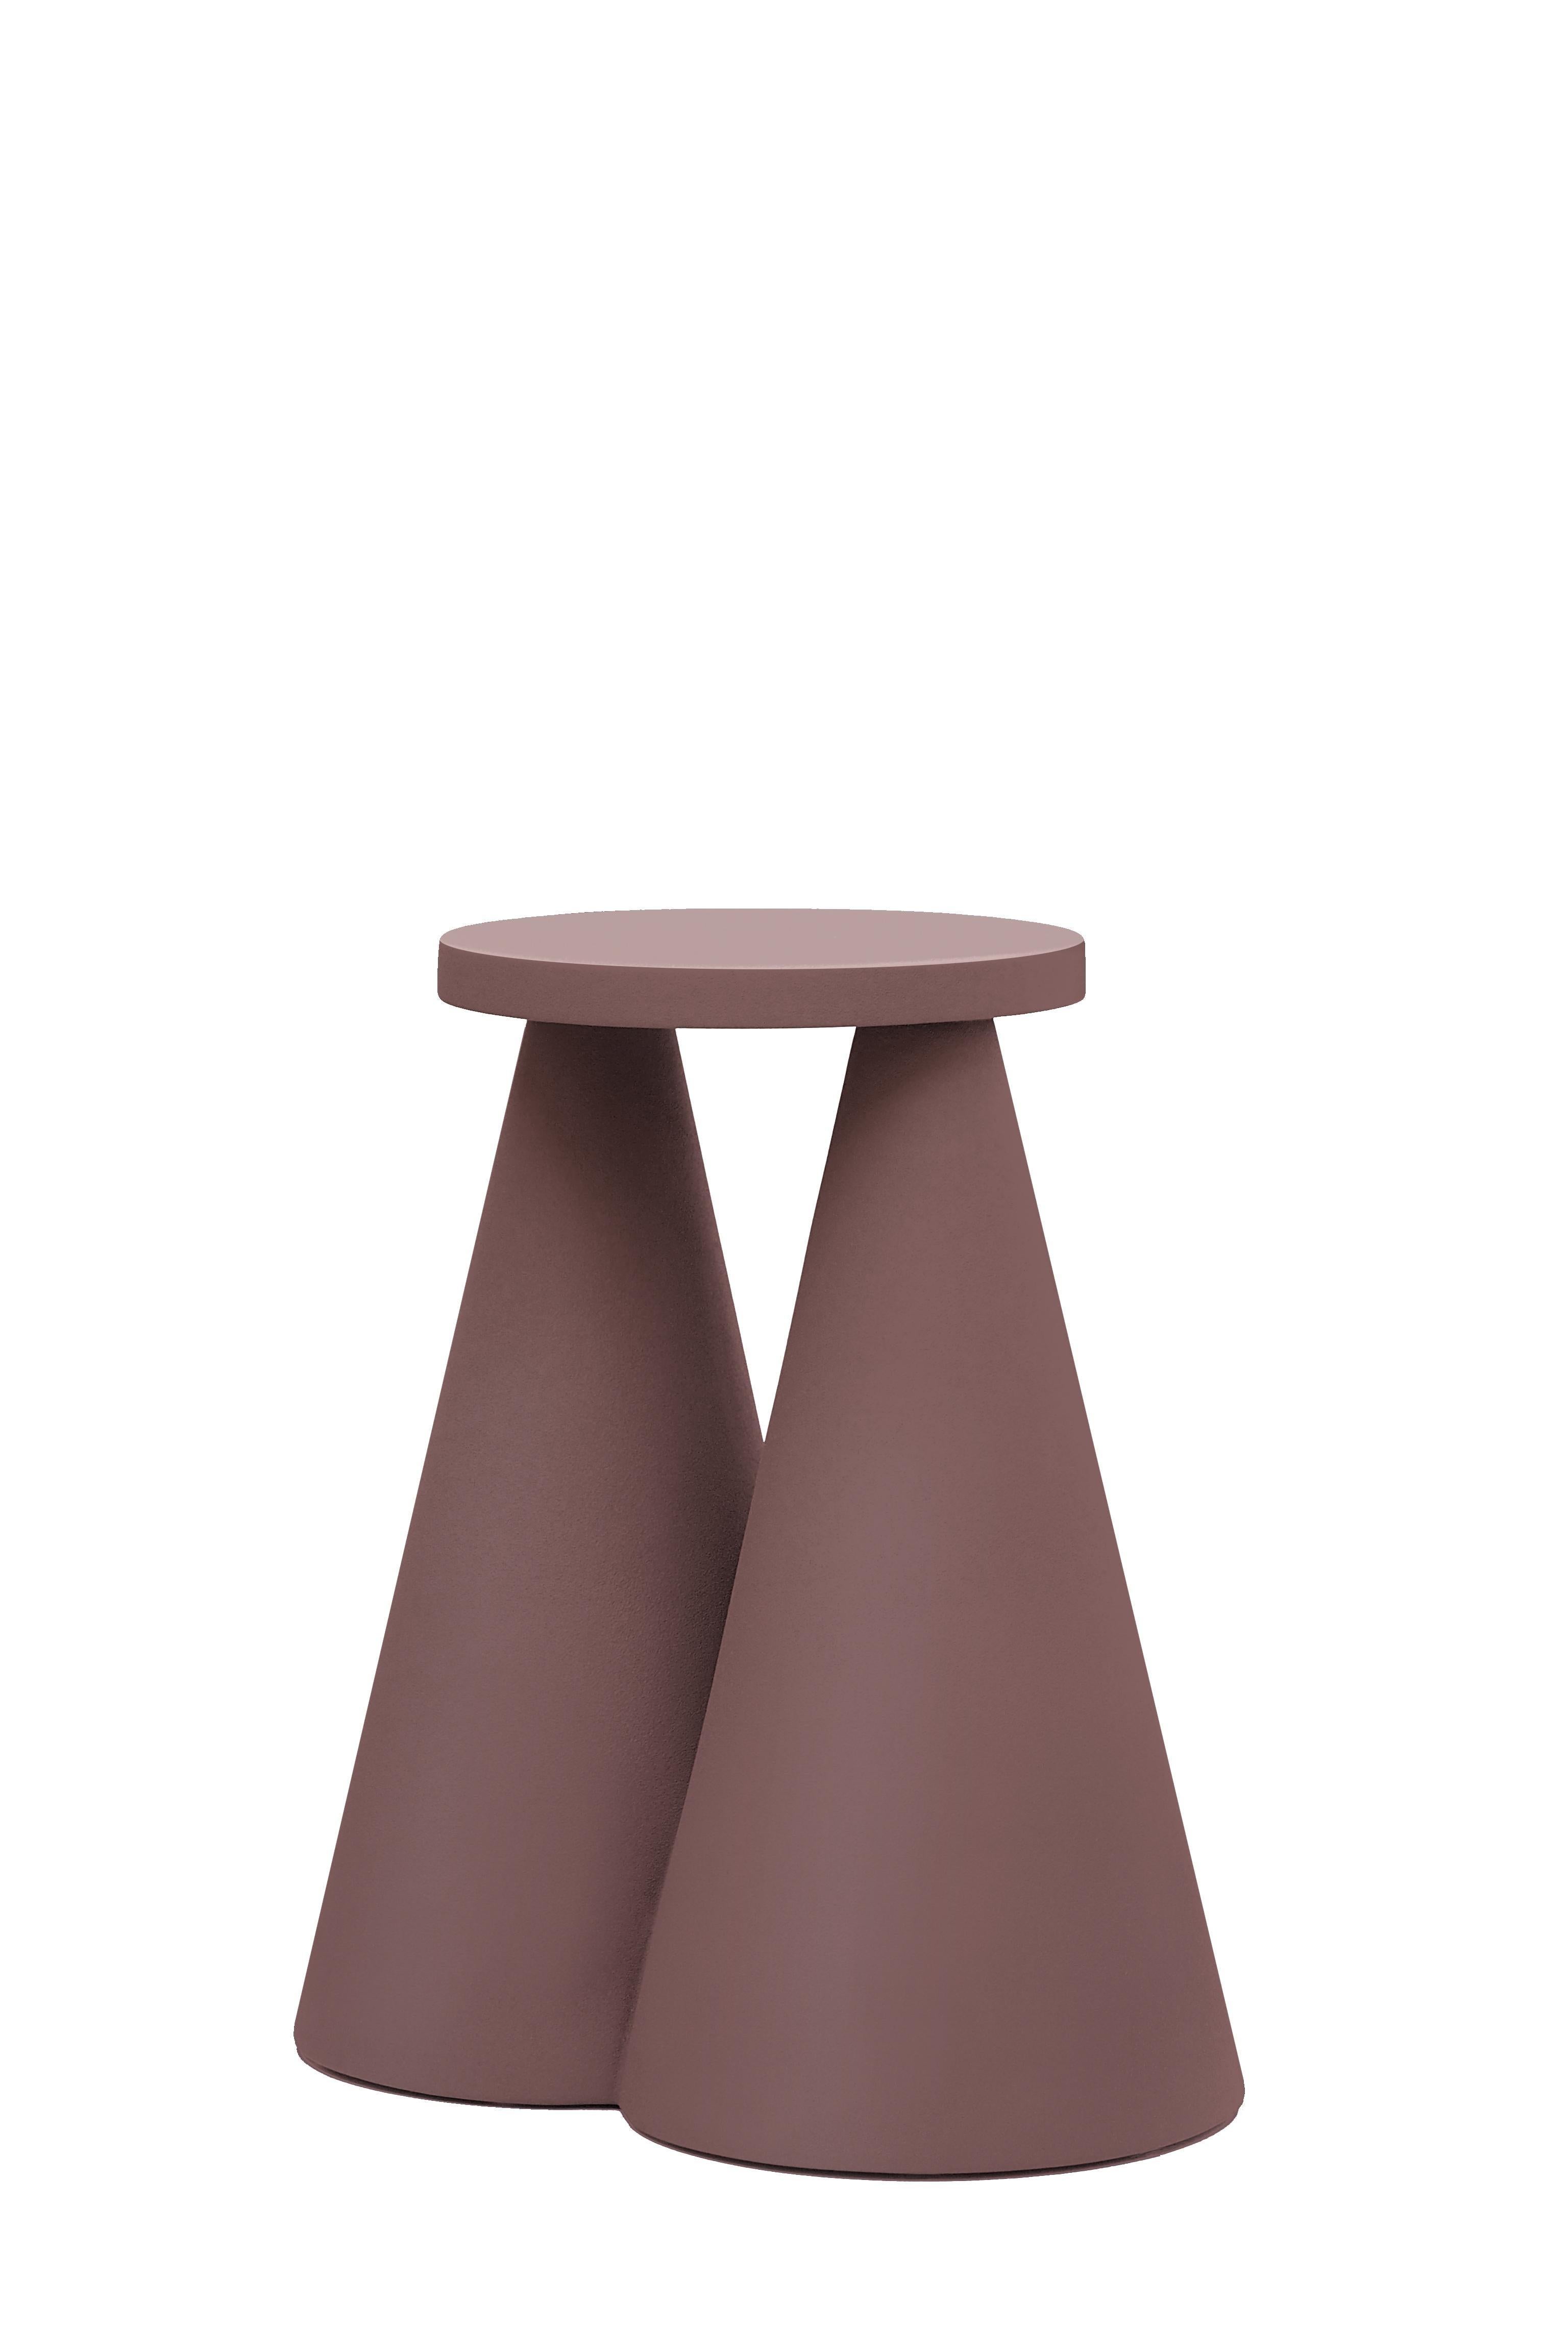 Modern Isola Side Table by Cara Davide